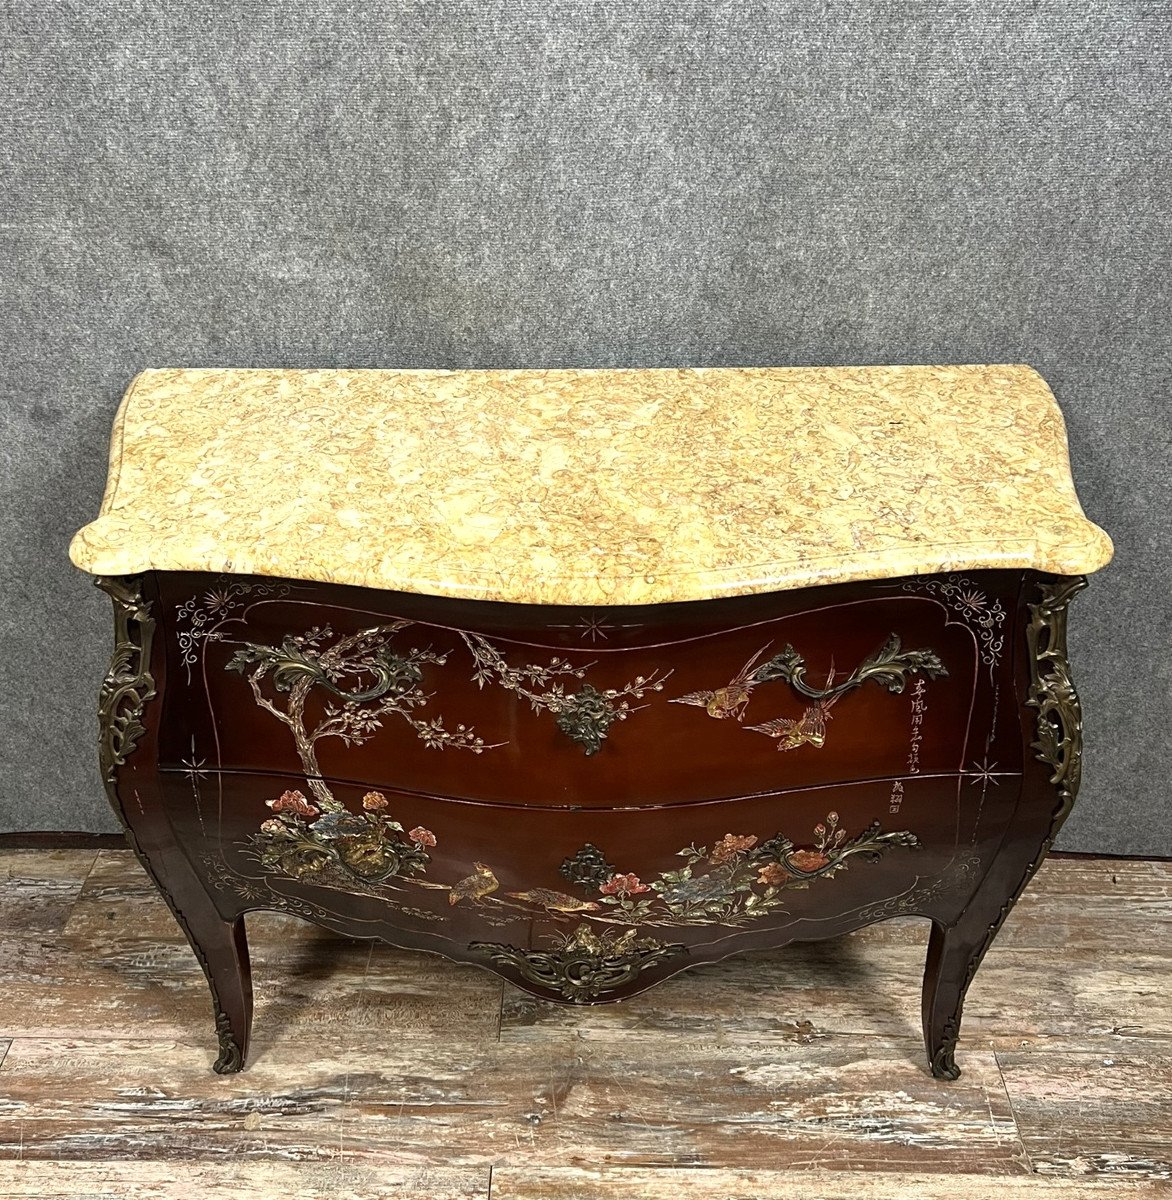 Curved Sauteuse Commode In Lacquer With Chinese Decor 20th Century (b)   -photo-1